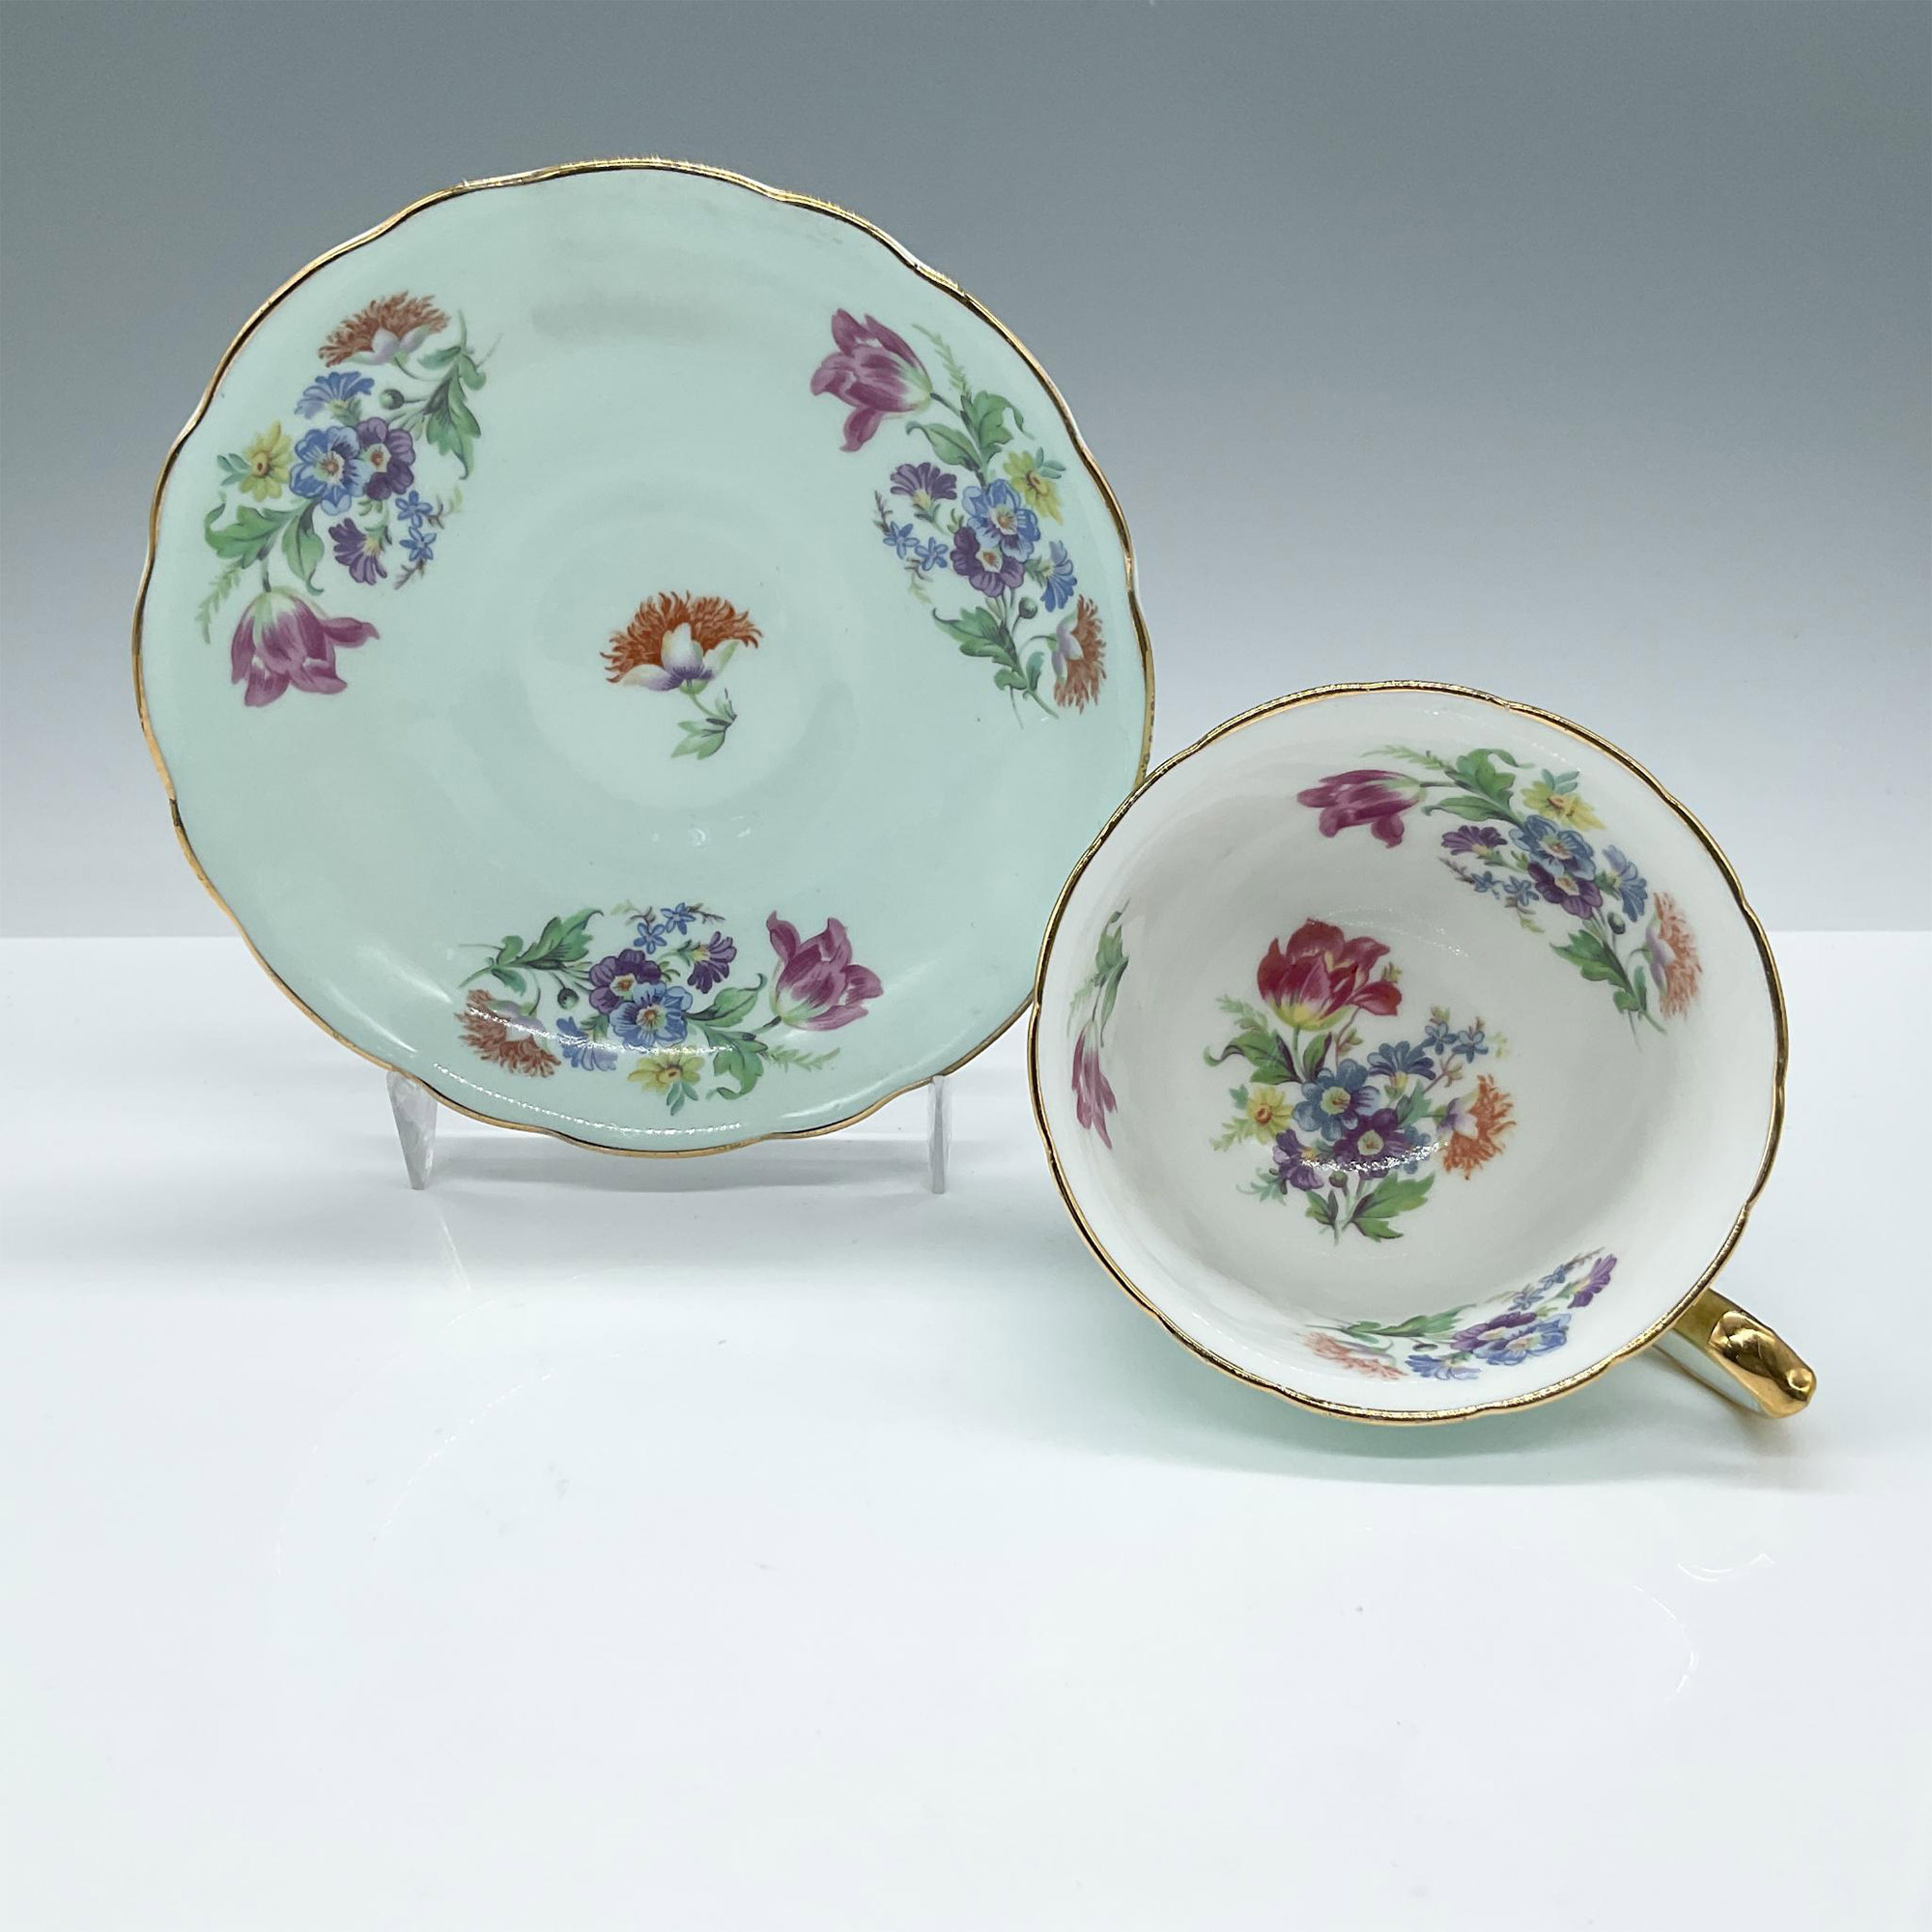 Hammersley & Co Bone China Tea Cup and Saucer Set - Image 4 of 5